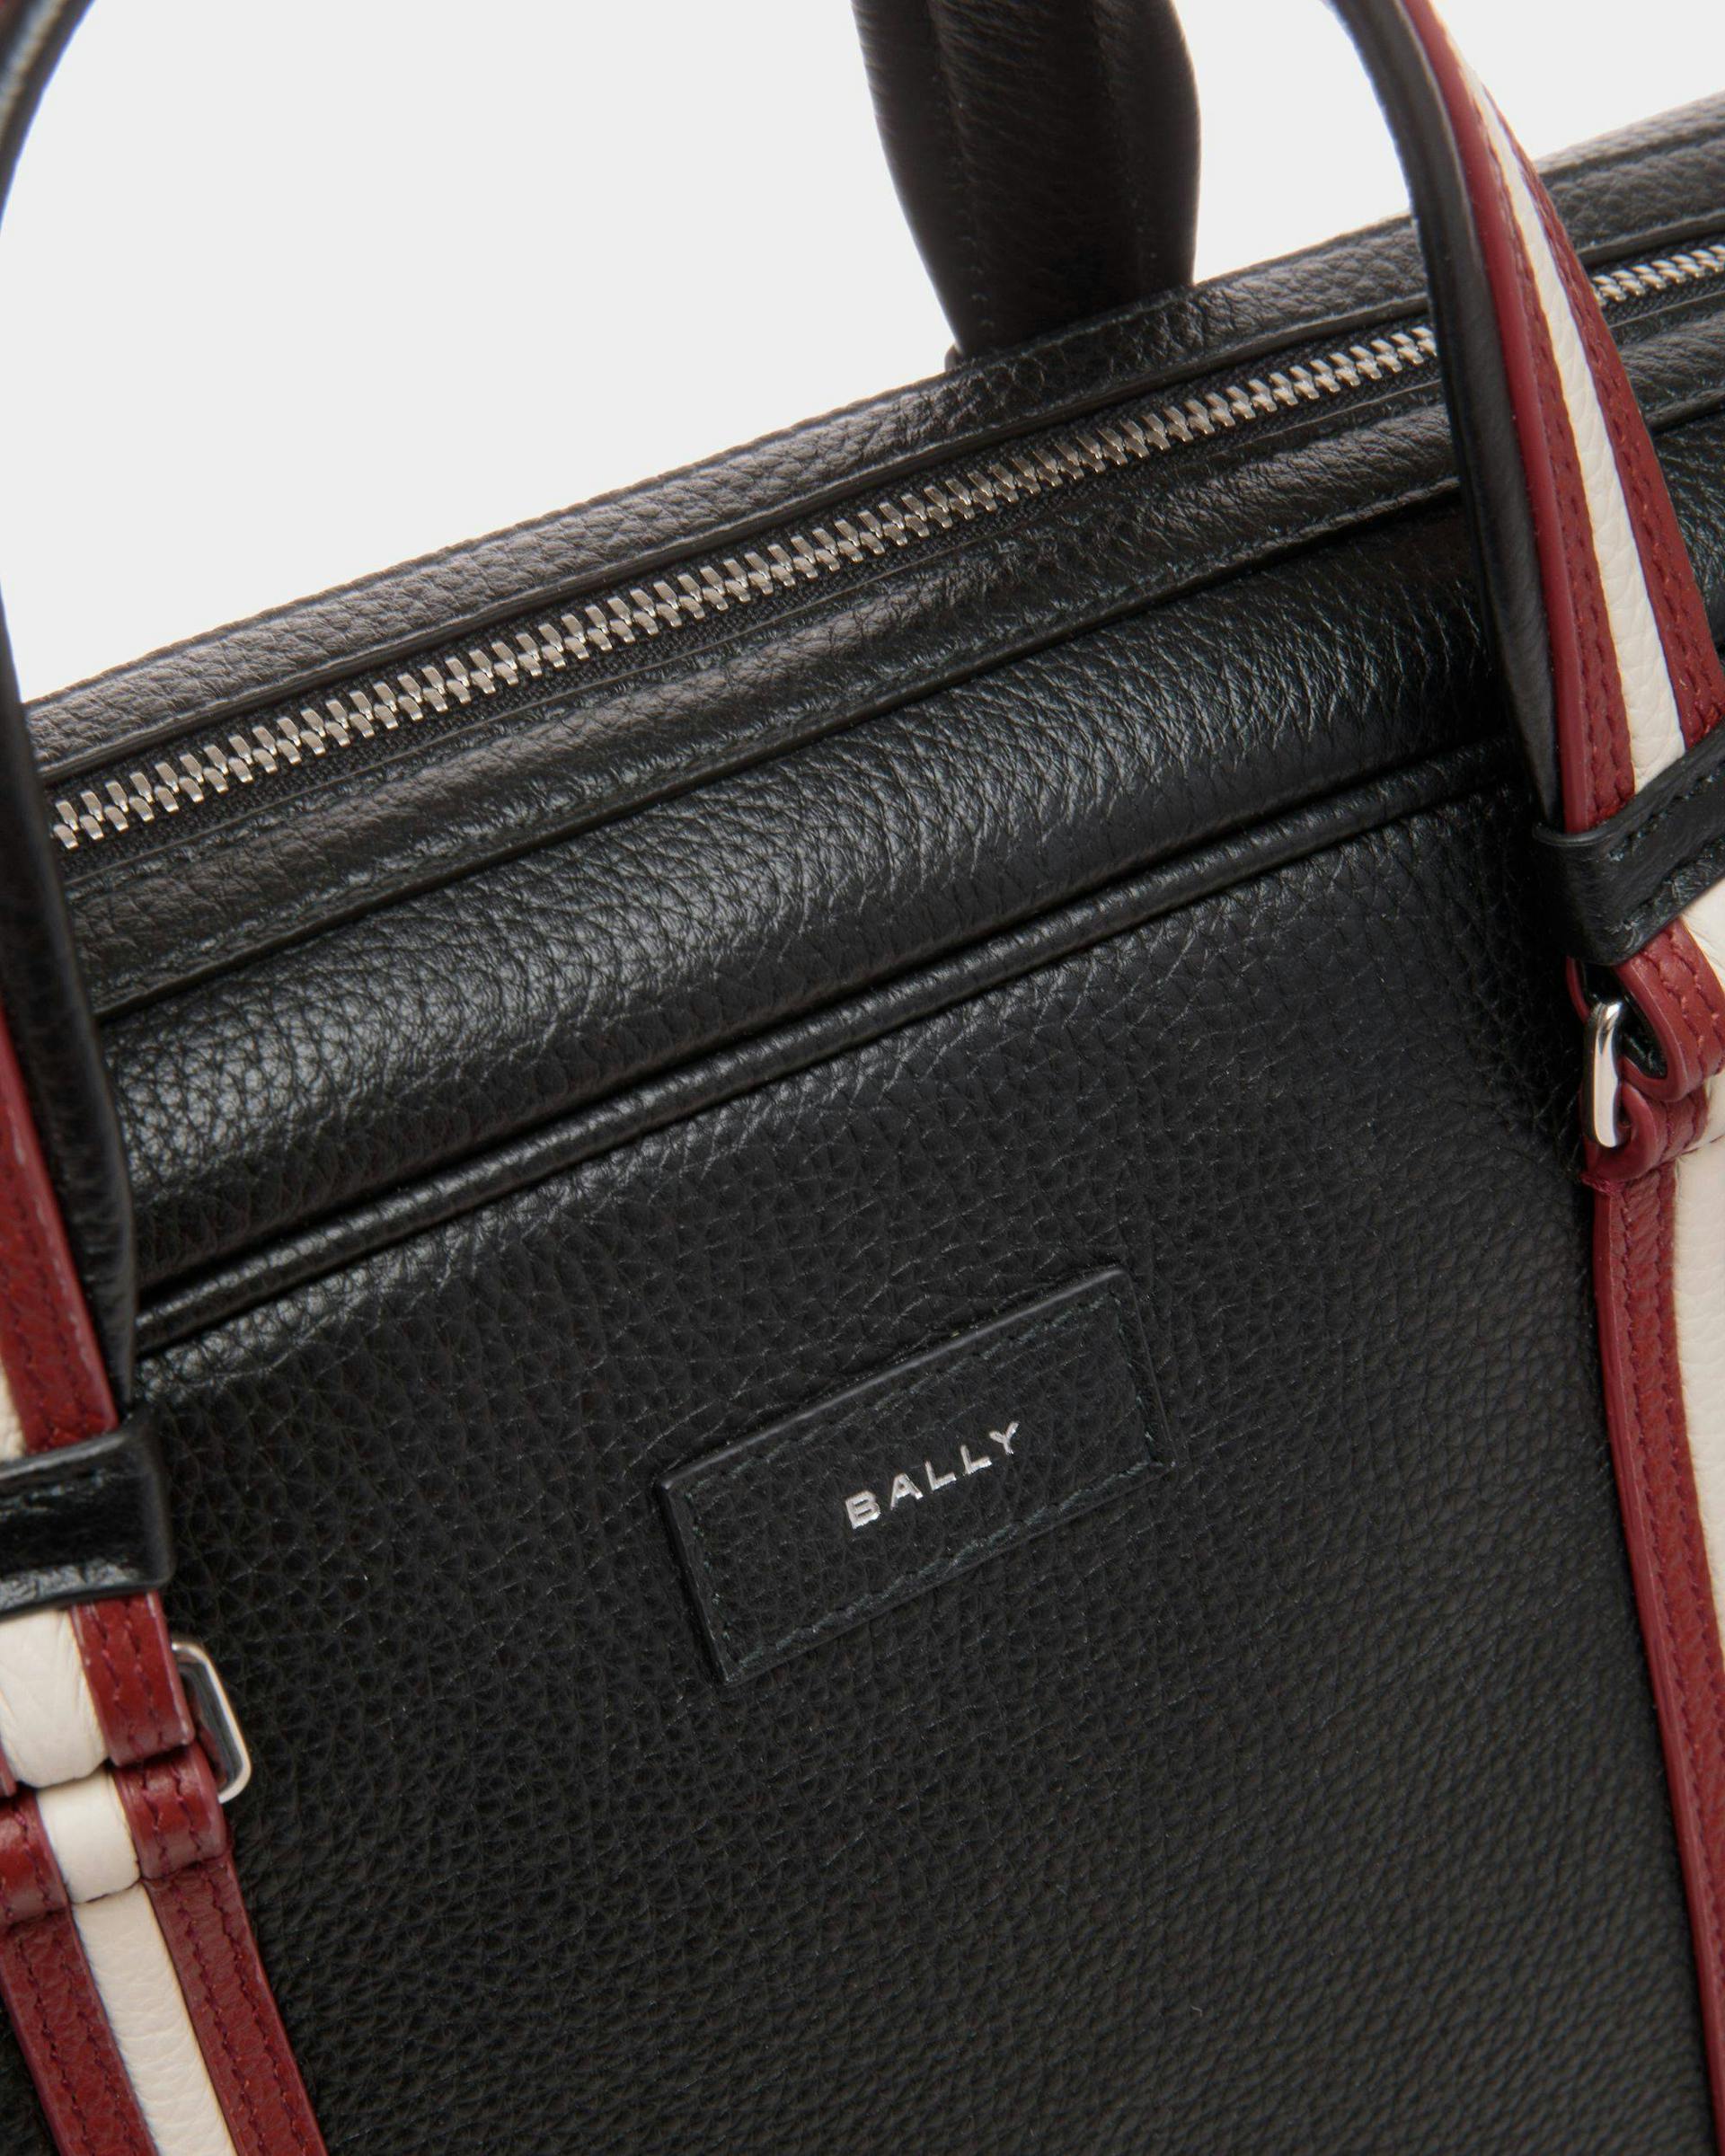 Men's Code Briefcase In Black Grained Leather | Bally | Still Life Detail